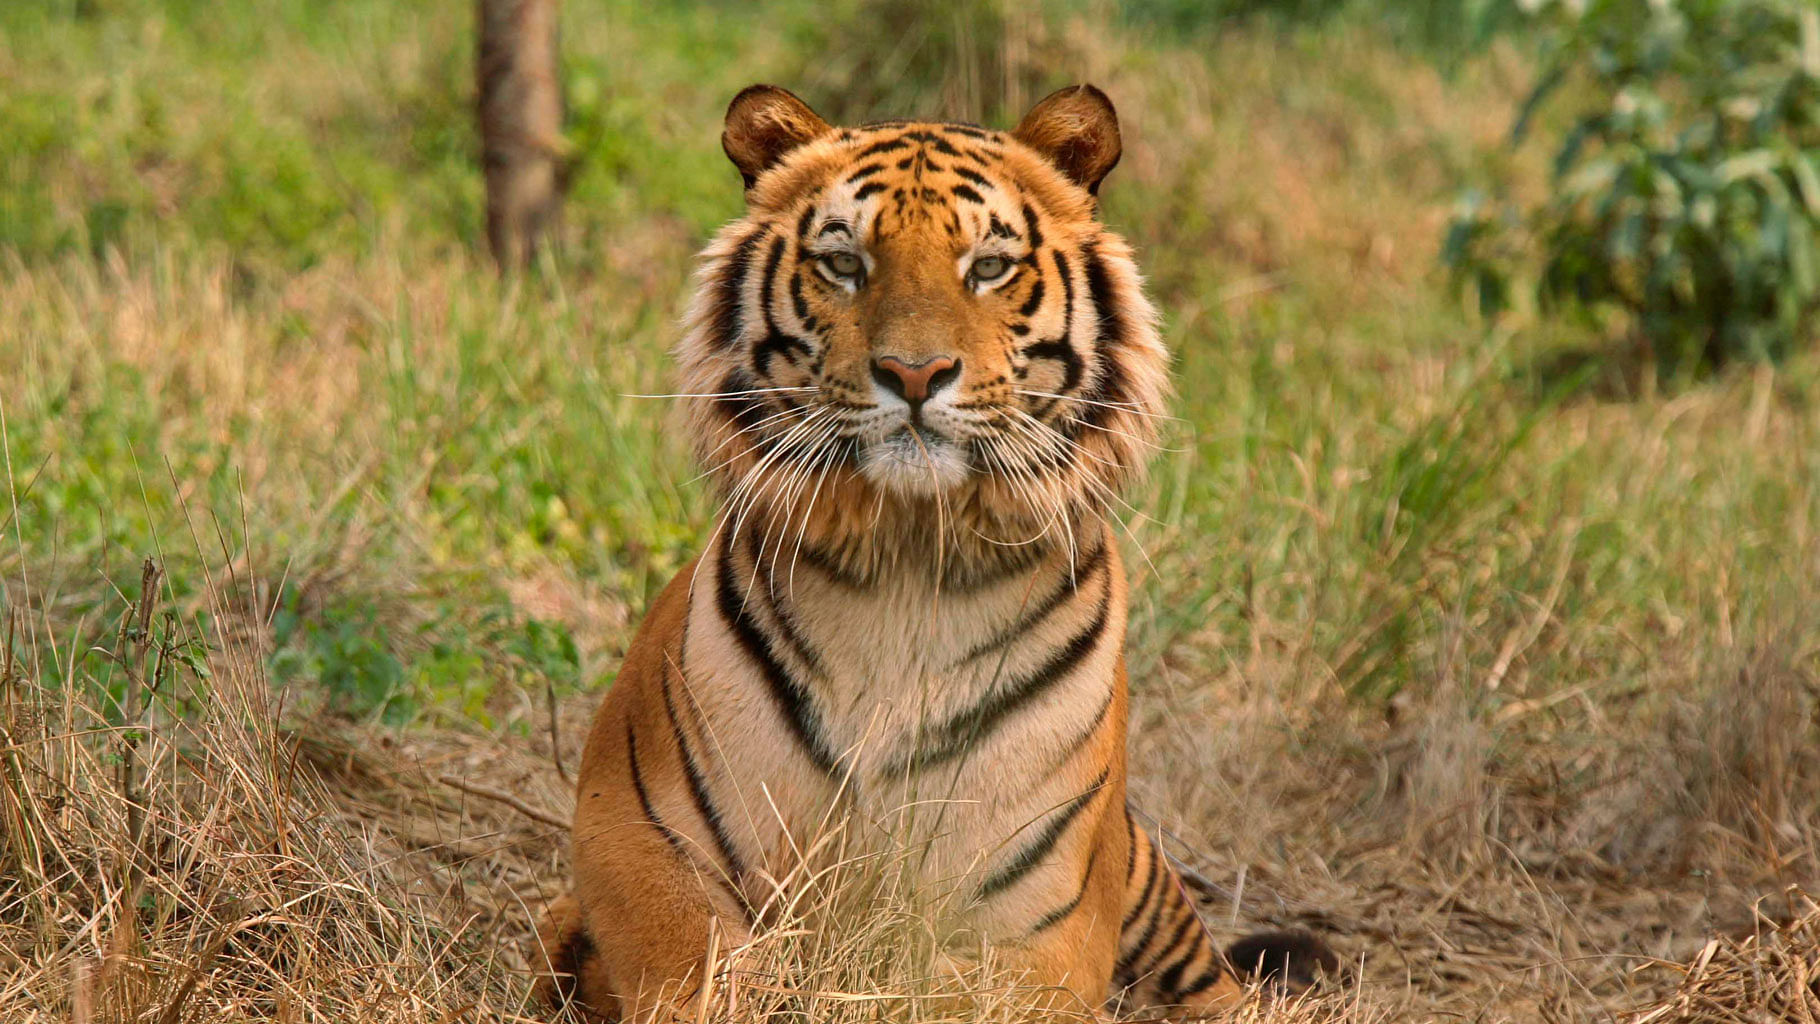 Raja, an 8-year Royal Bengal Tiger rescued at Jaldapara Wildlife Sanctuary in West Bengal. (Photo: Reuters Archives)